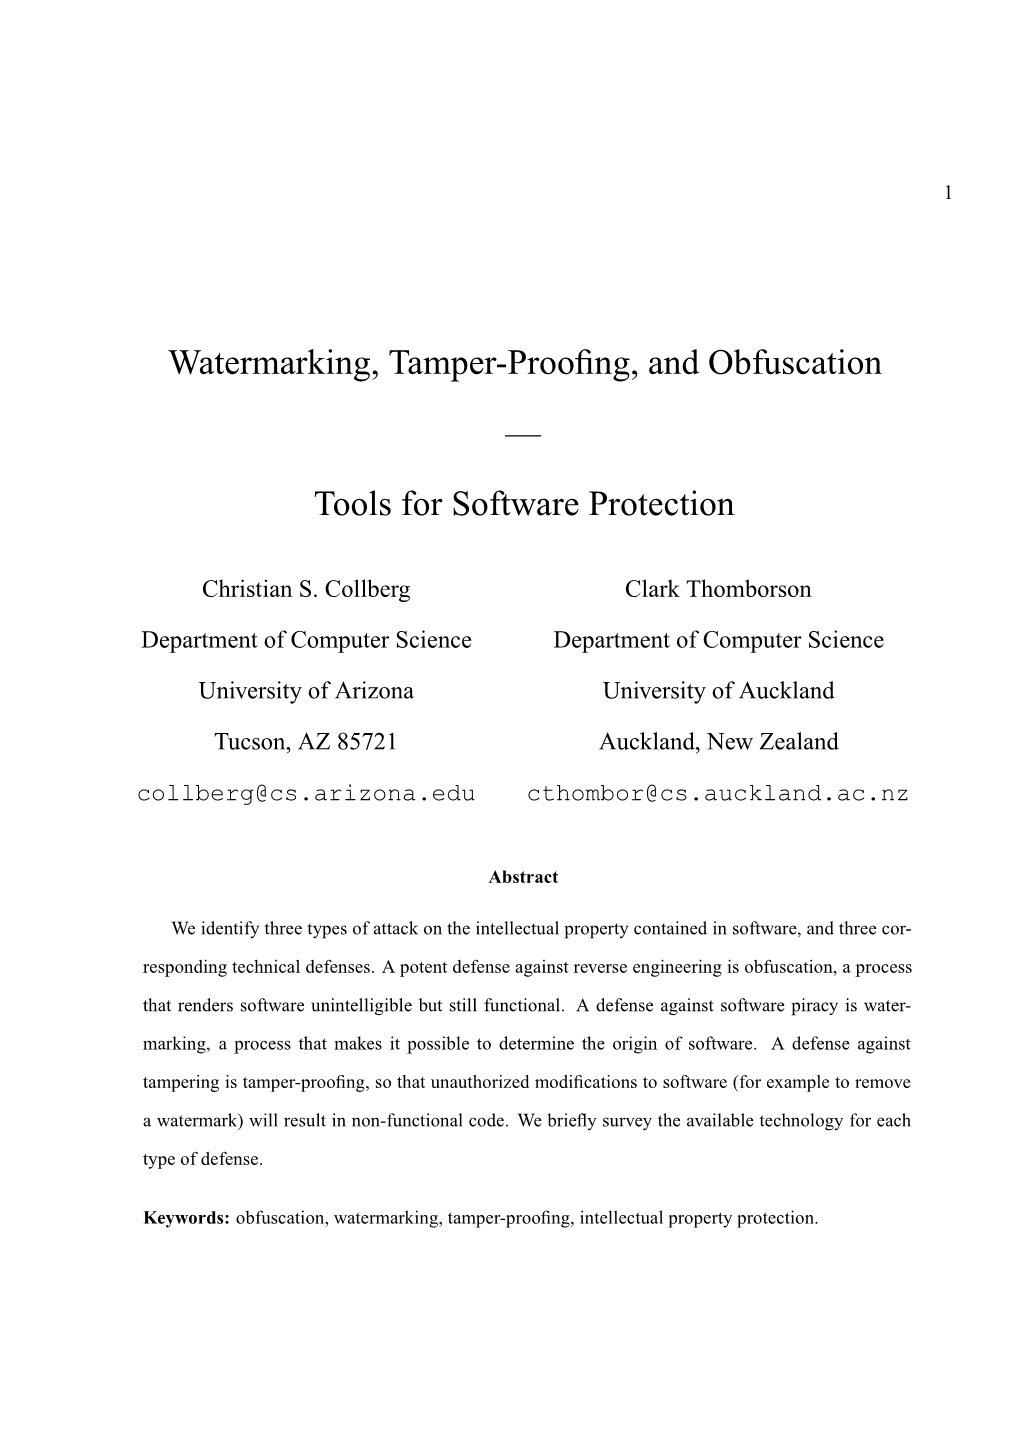 Watermarking, Tamper-Proofing, and Obfuscation